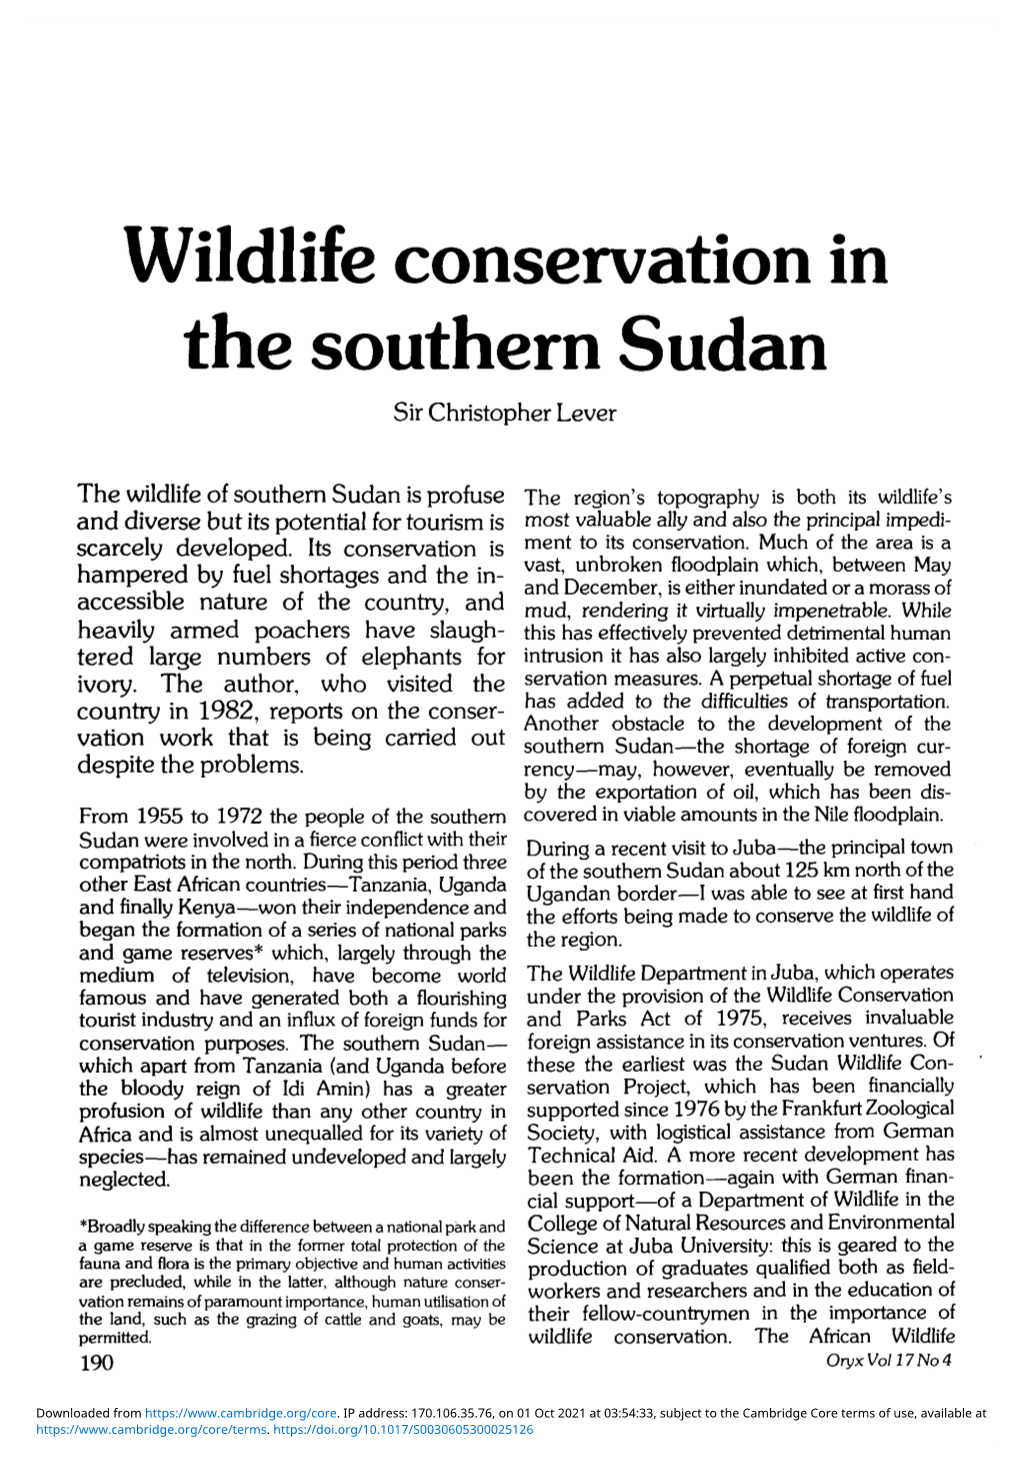 Wildlife Conservation in the Southern Sudan Sir Christopher Lever